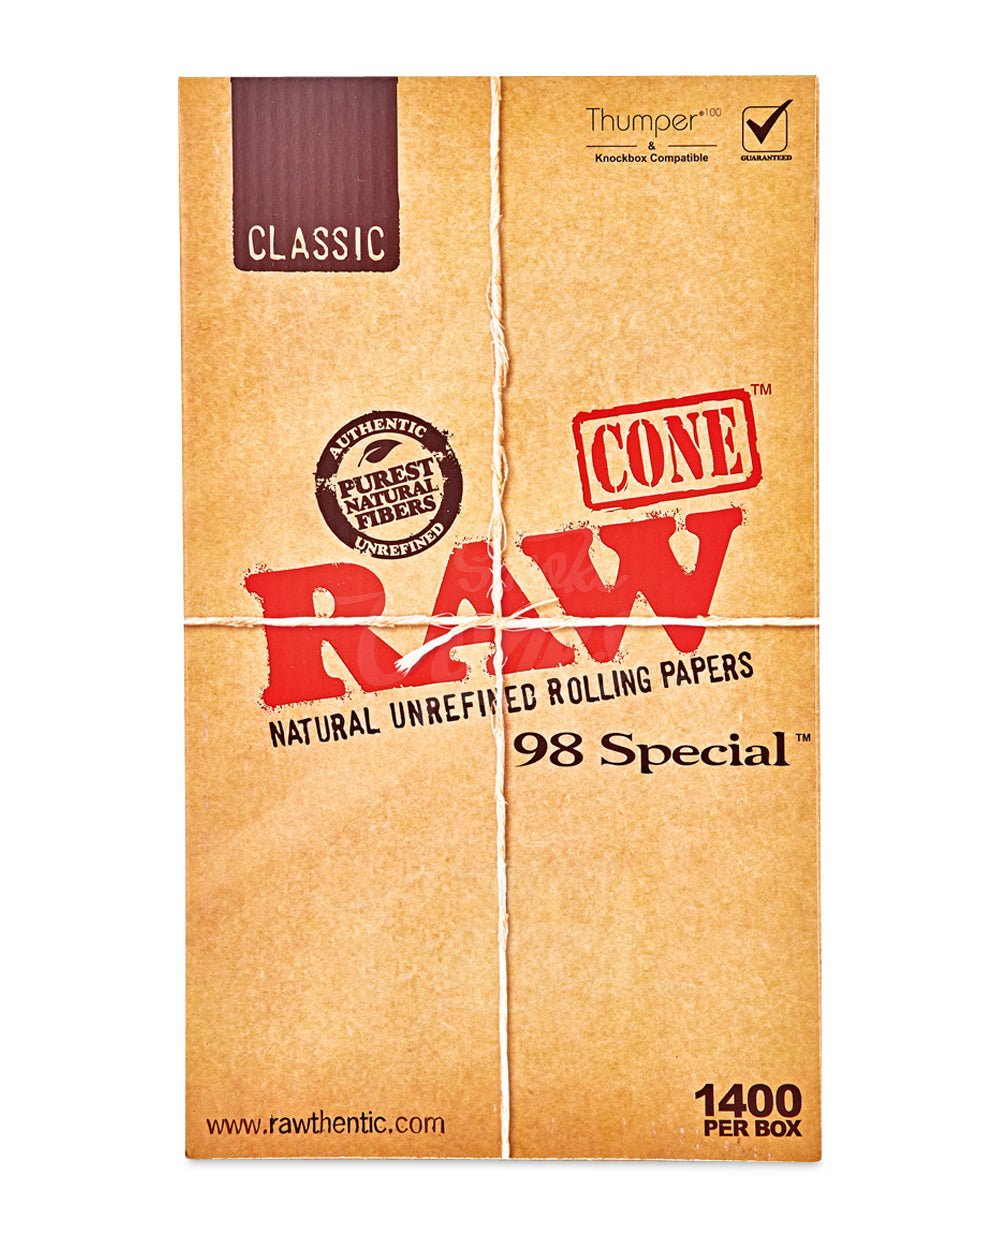 RAW 98mm Classic 98 Special Pre Rolled Unbleached Cones 1400/Box - 4